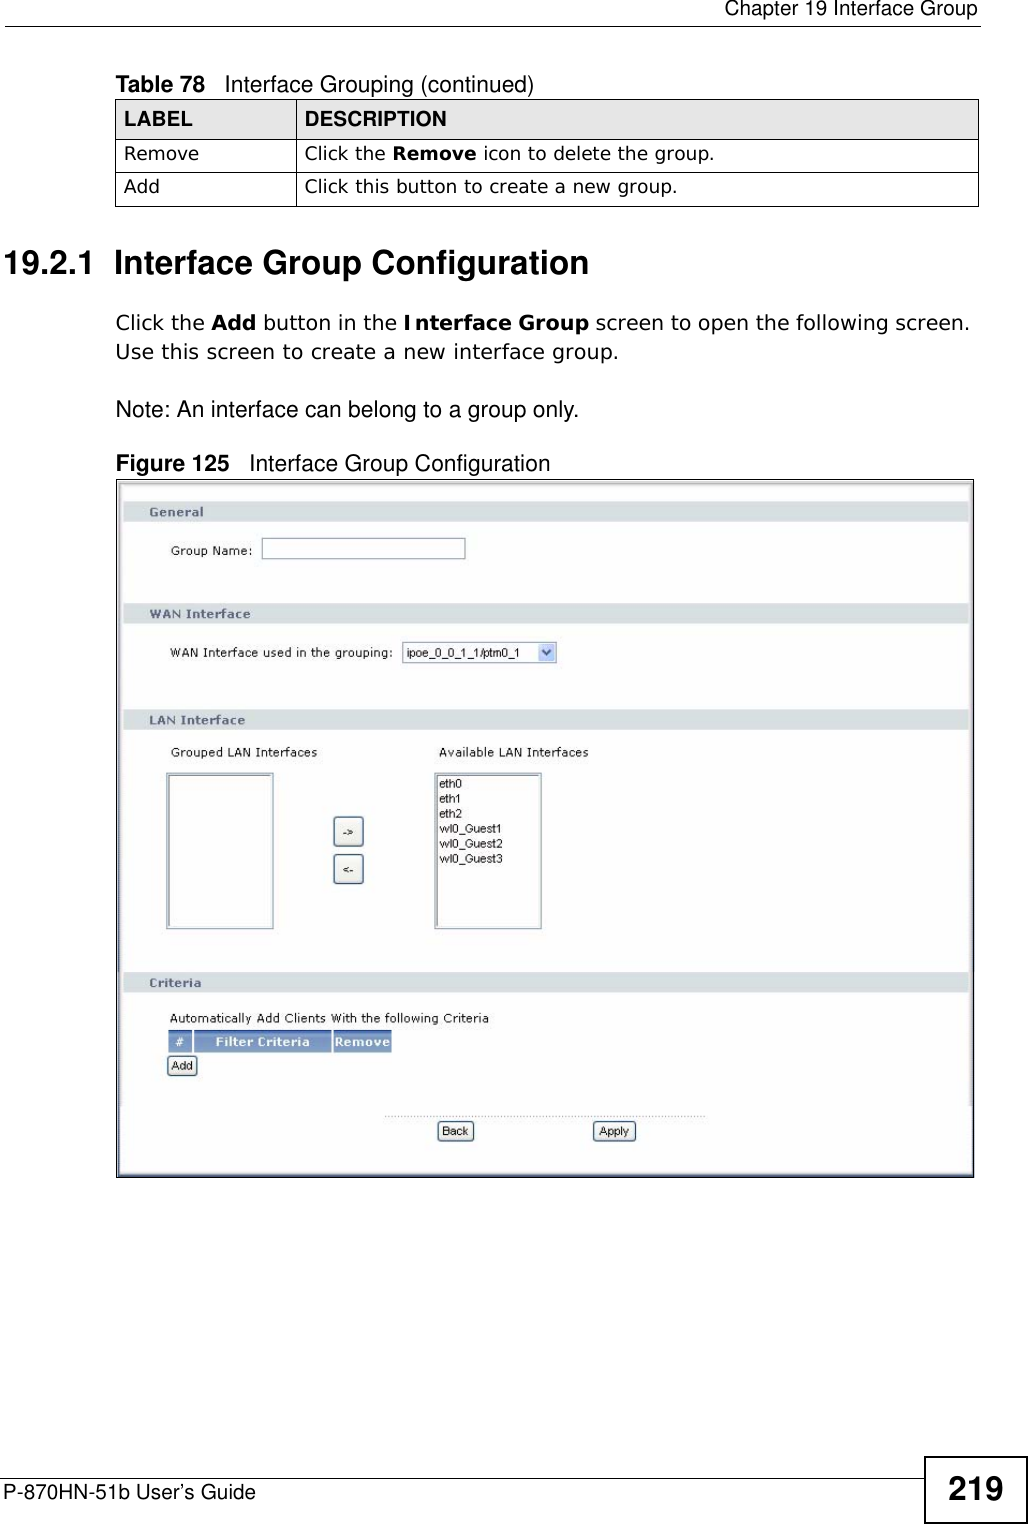  Chapter 19 Interface GroupP-870HN-51b User’s Guide 21919.2.1  Interface Group ConfigurationClick the Add button in the Interface Group screen to open the following screen. Use this screen to create a new interface group. Note: An interface can belong to a group only.Figure 125   Interface Group Configuration Remove Click the Remove icon to delete the group.Add Click this button to create a new group.Table 78   Interface Grouping (continued)LABEL DESCRIPTION